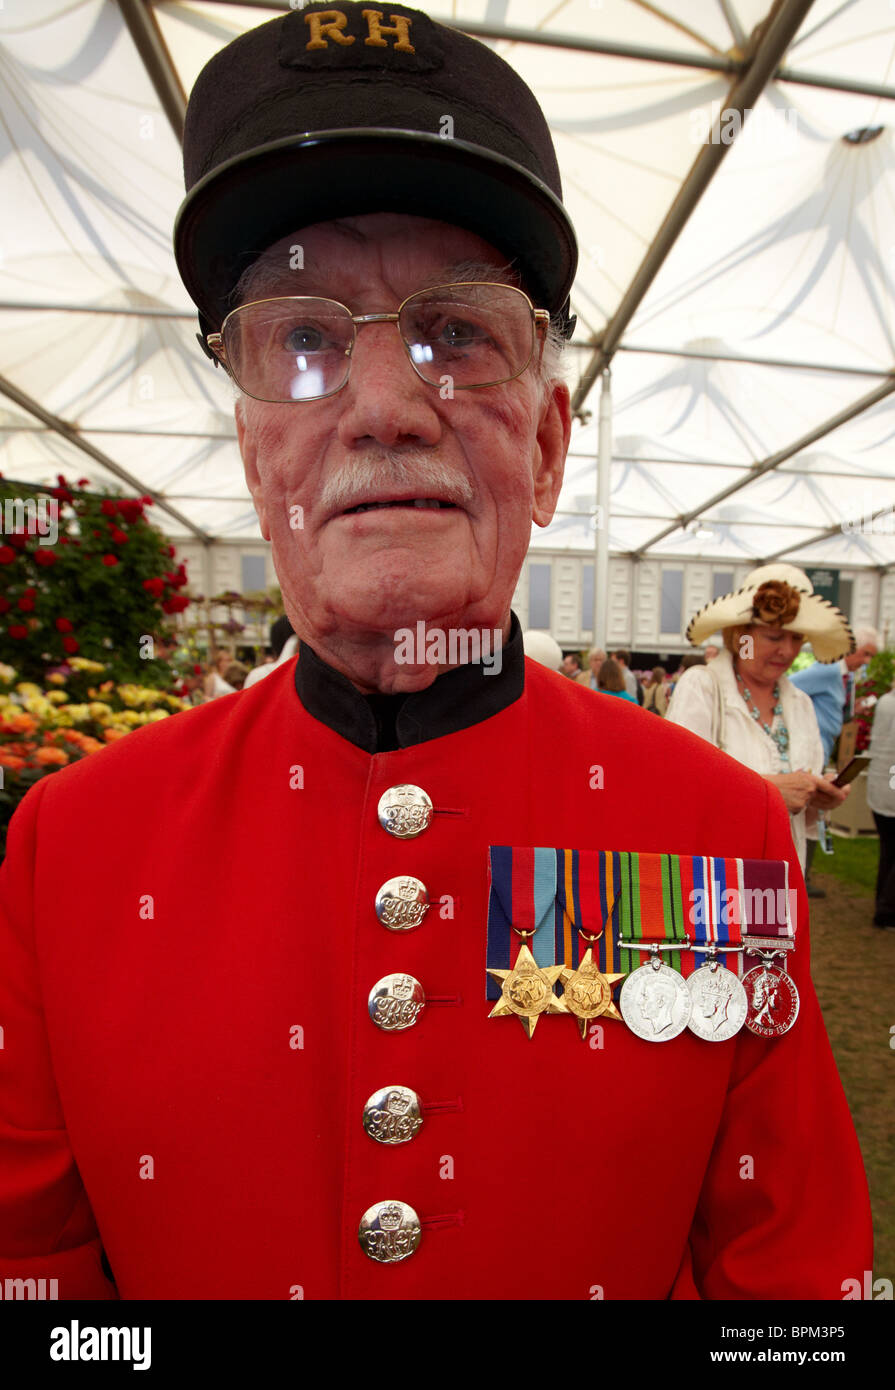 War Medals On The Red Tunic Of A Chelsea Pensioner Chelsea Flower Show London Europe Stock Photo